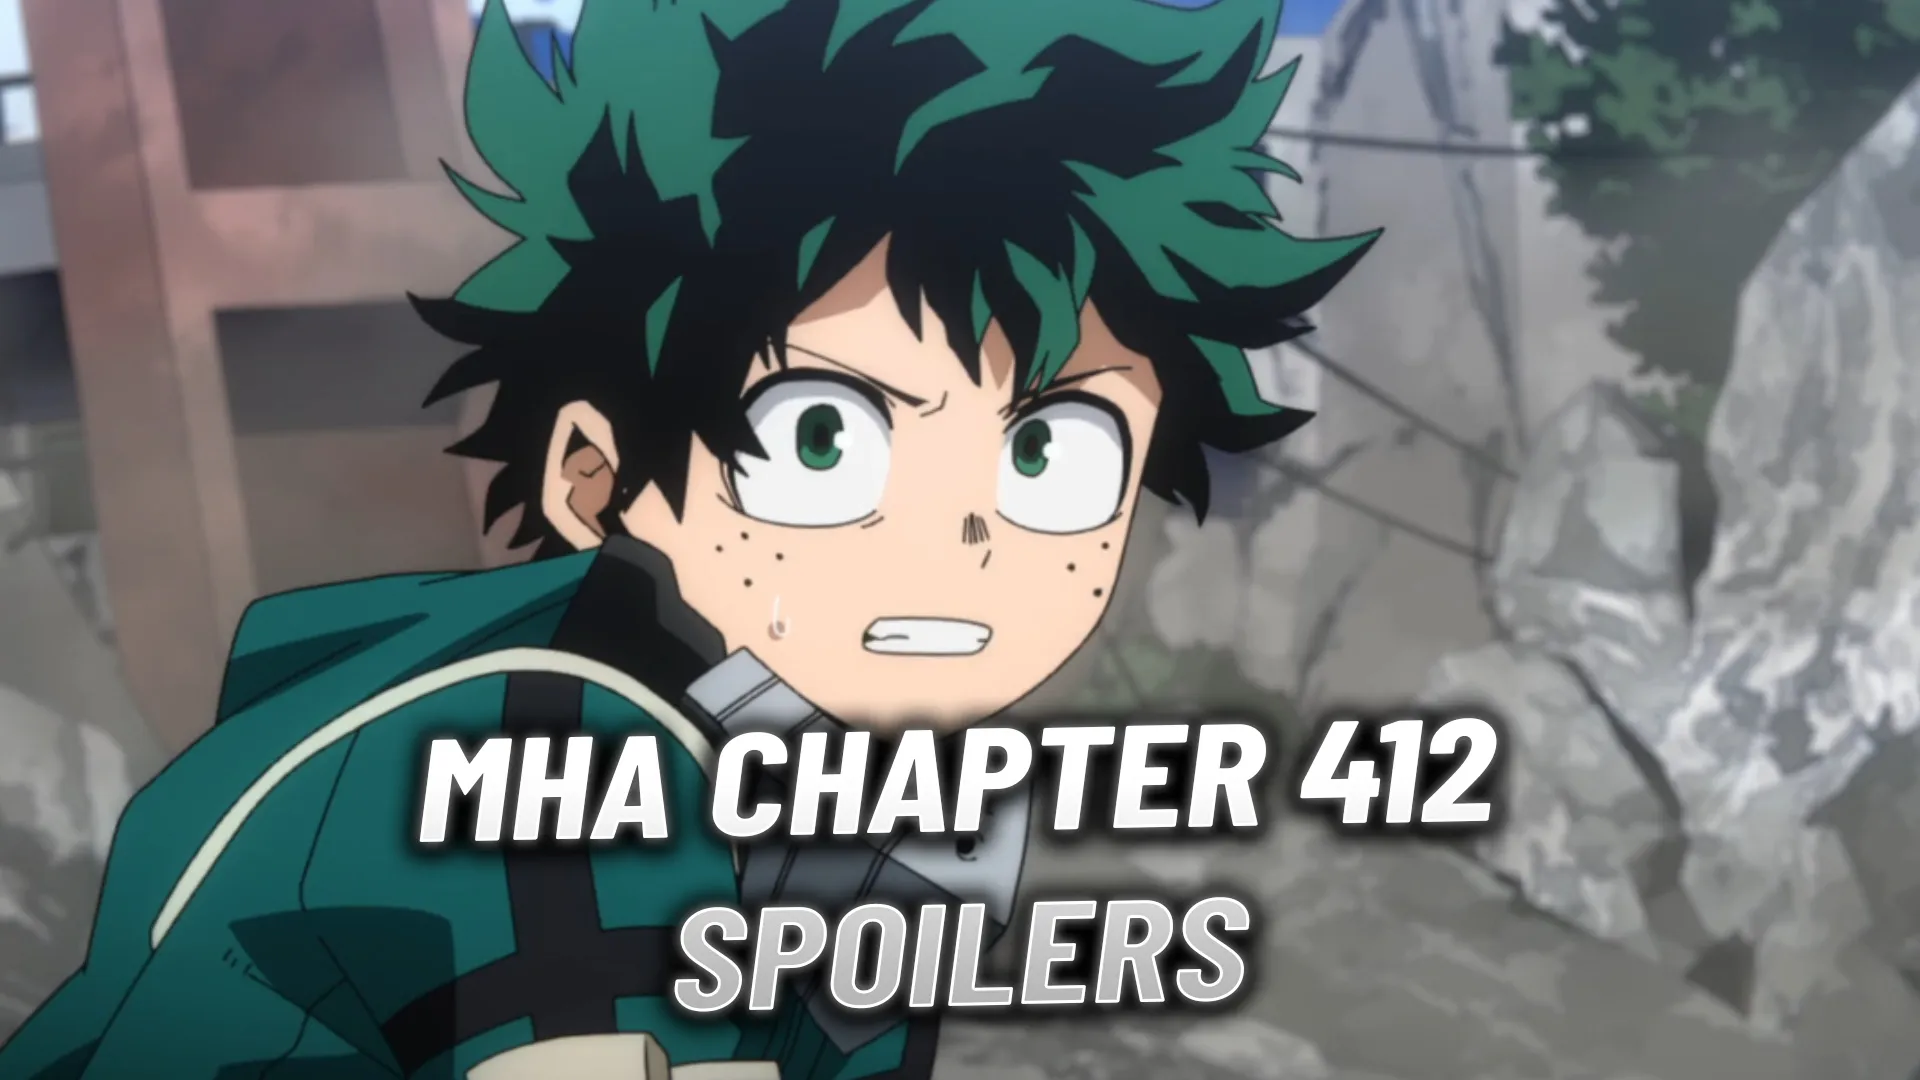 Exciting Update My Hero Academia Chapter 412 Release Date Announced After Hiatus – Fans Gear Up for Epic Showdown